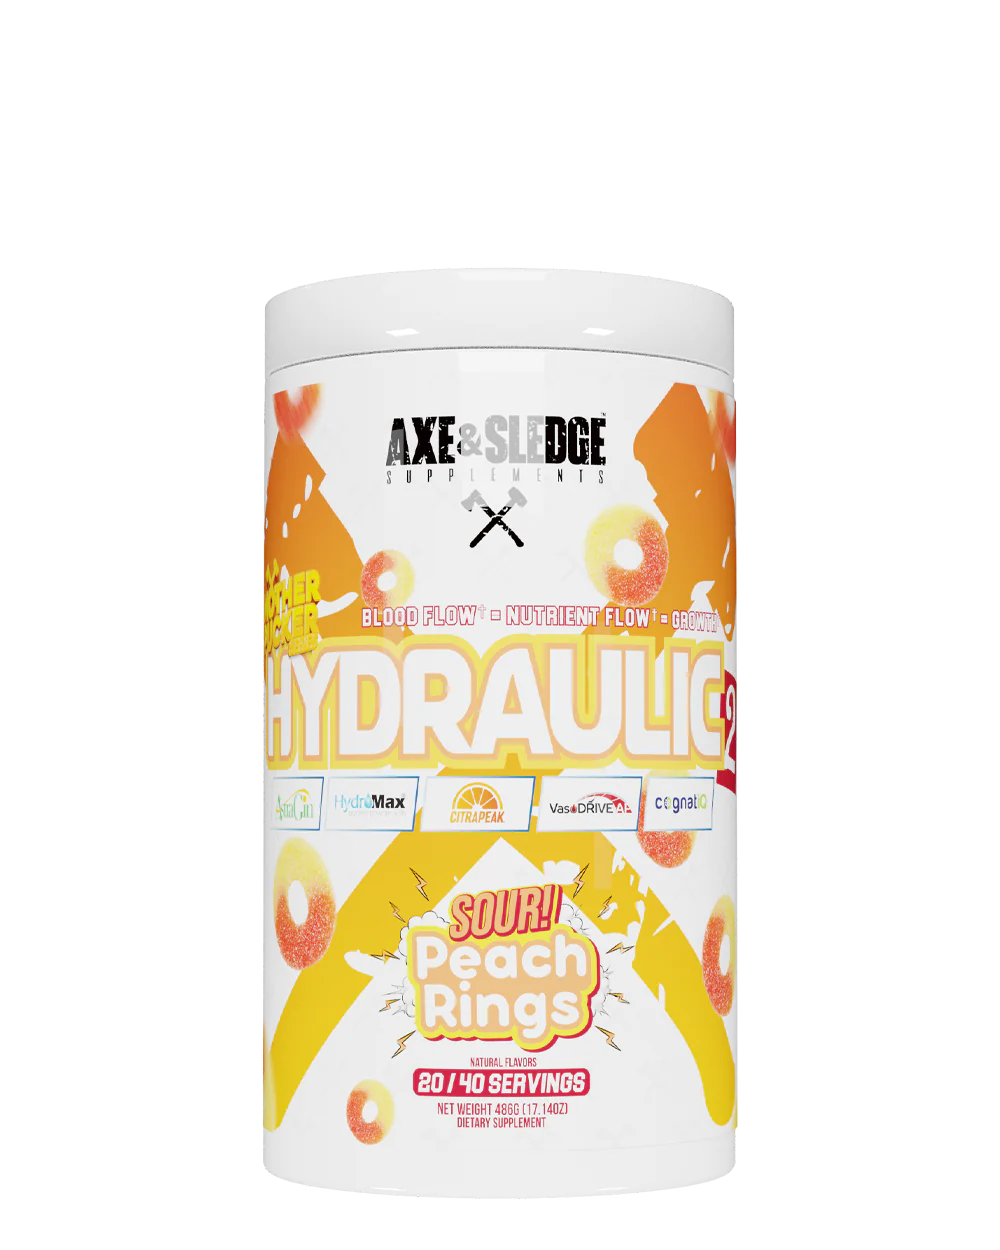 HYDRAULIC V2 MOTHER PUCKER SOUR PEACH RINGS